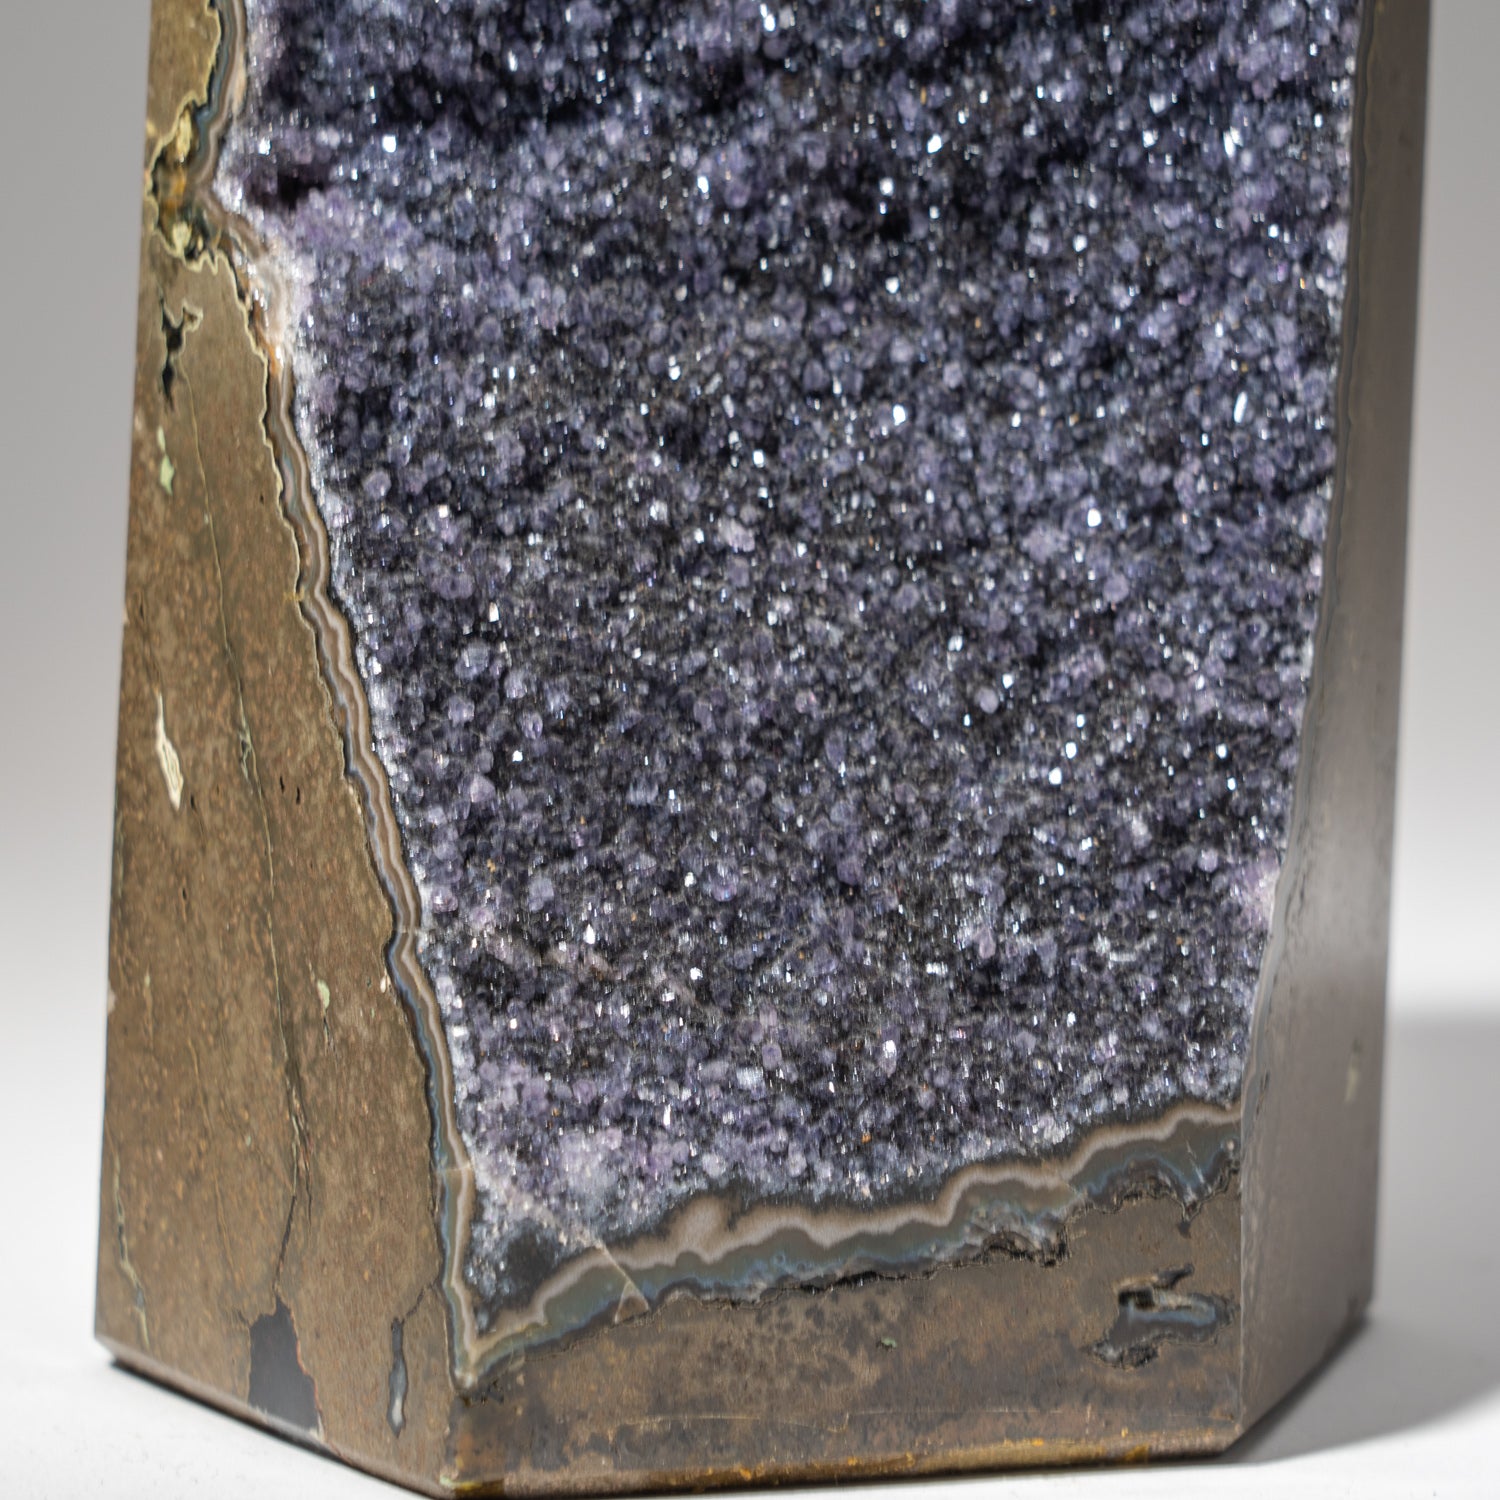 Genuine Polished Amethyst Crystal Geode Point From Brazil (4.5 lbs)